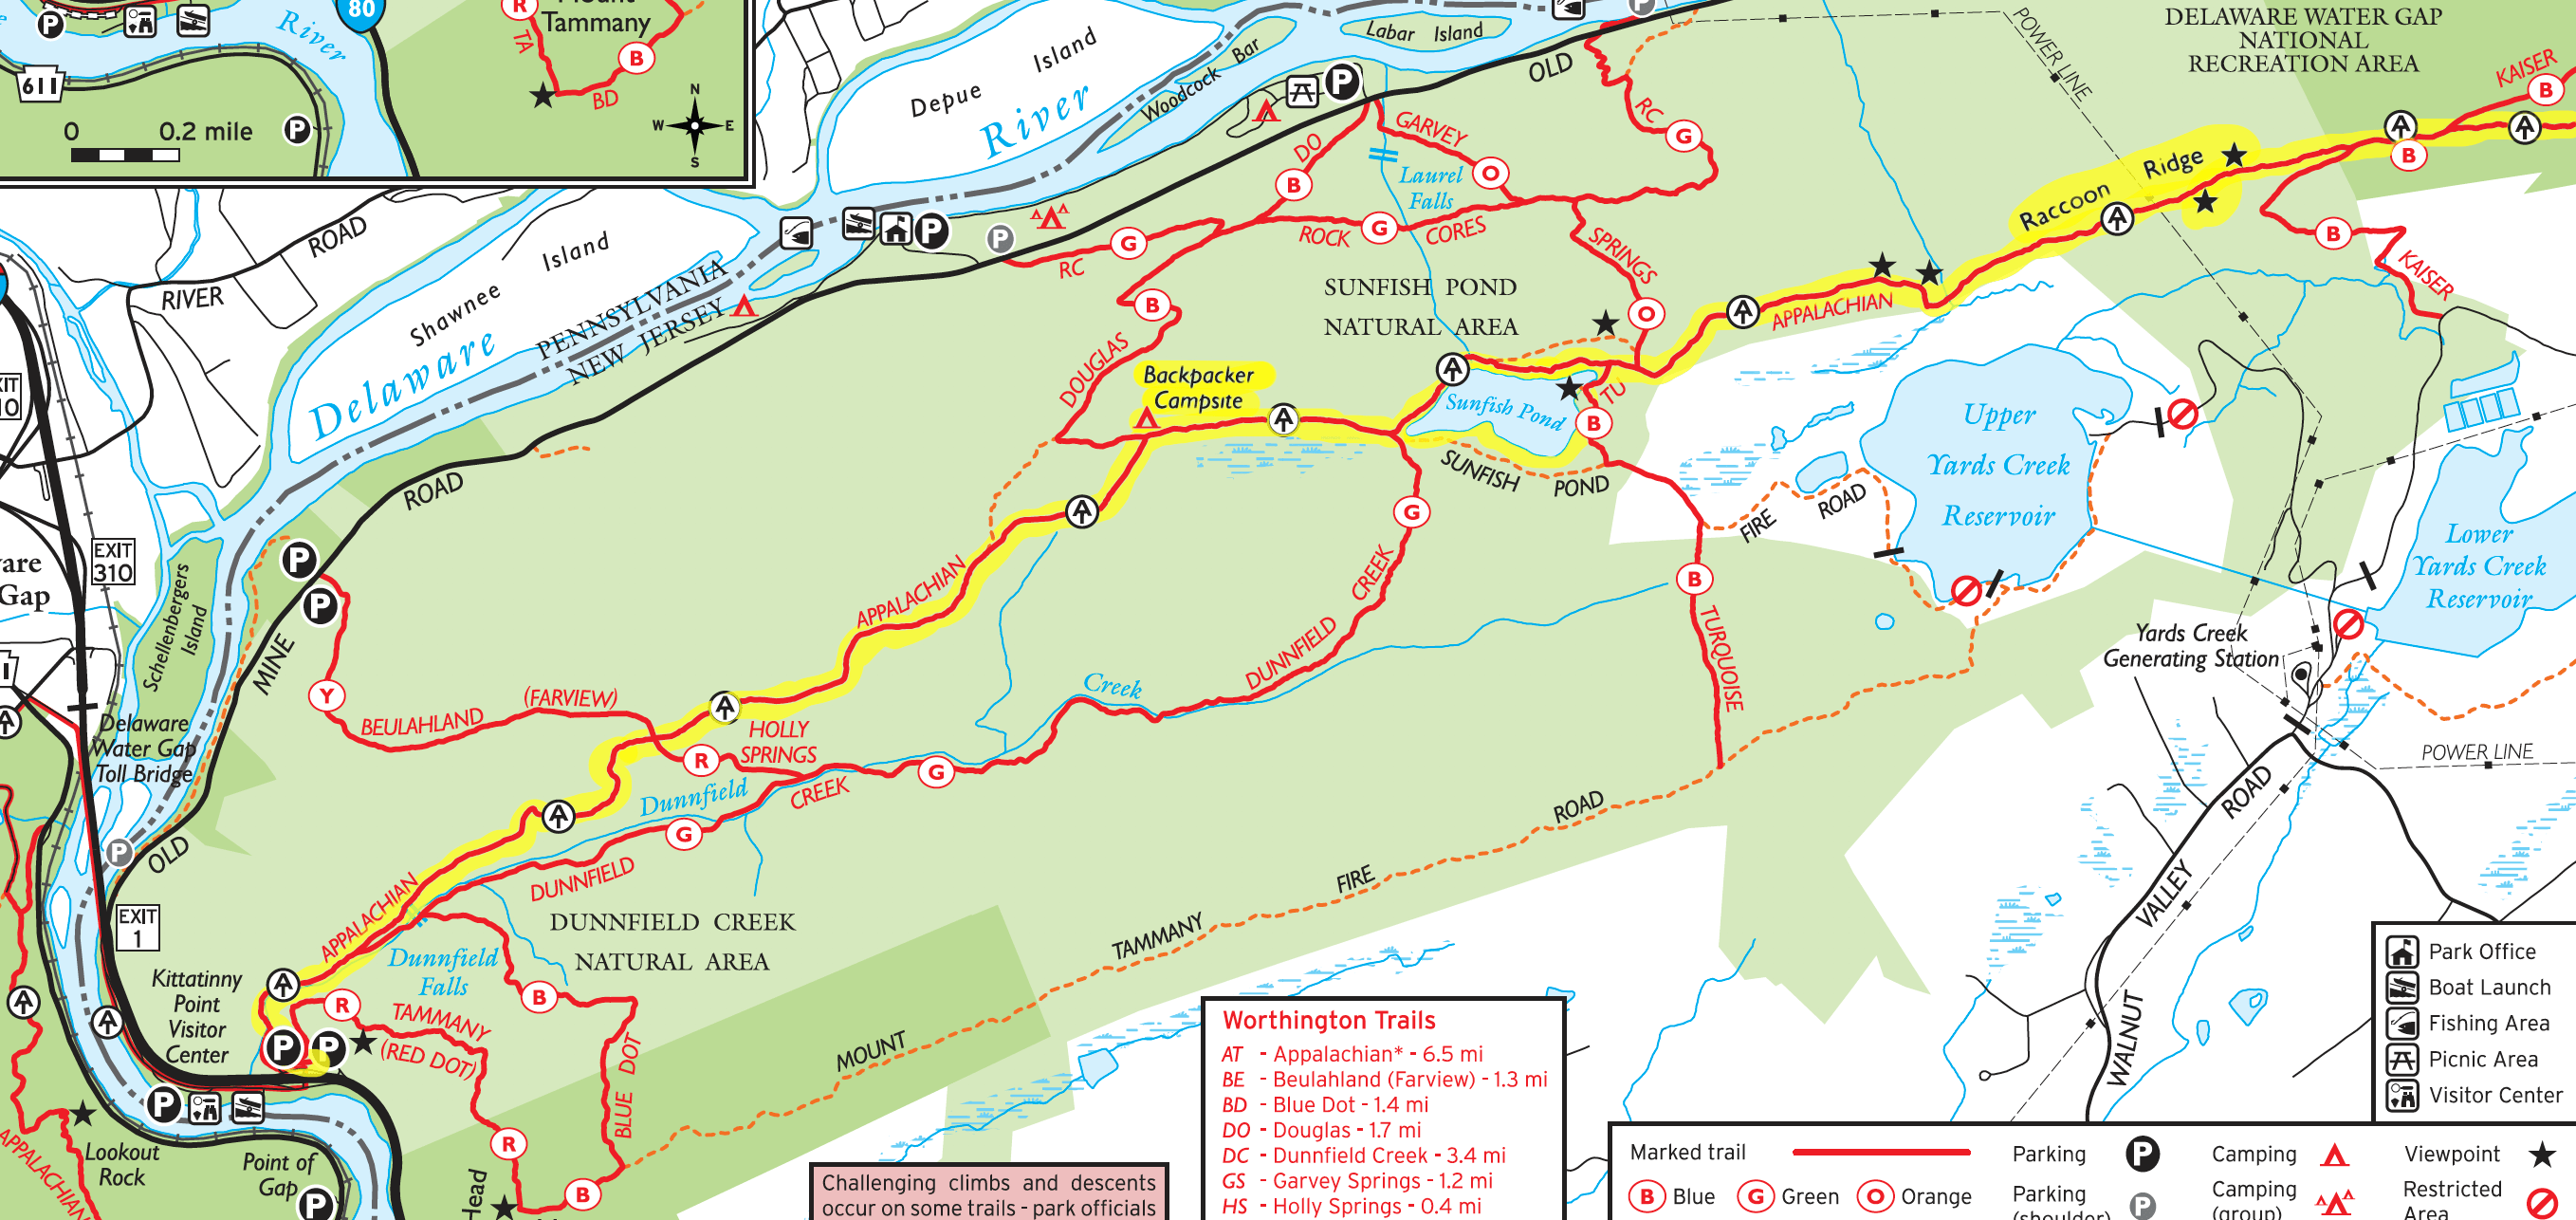 Detail of Worthington State Forest in the Delaware Water Gap